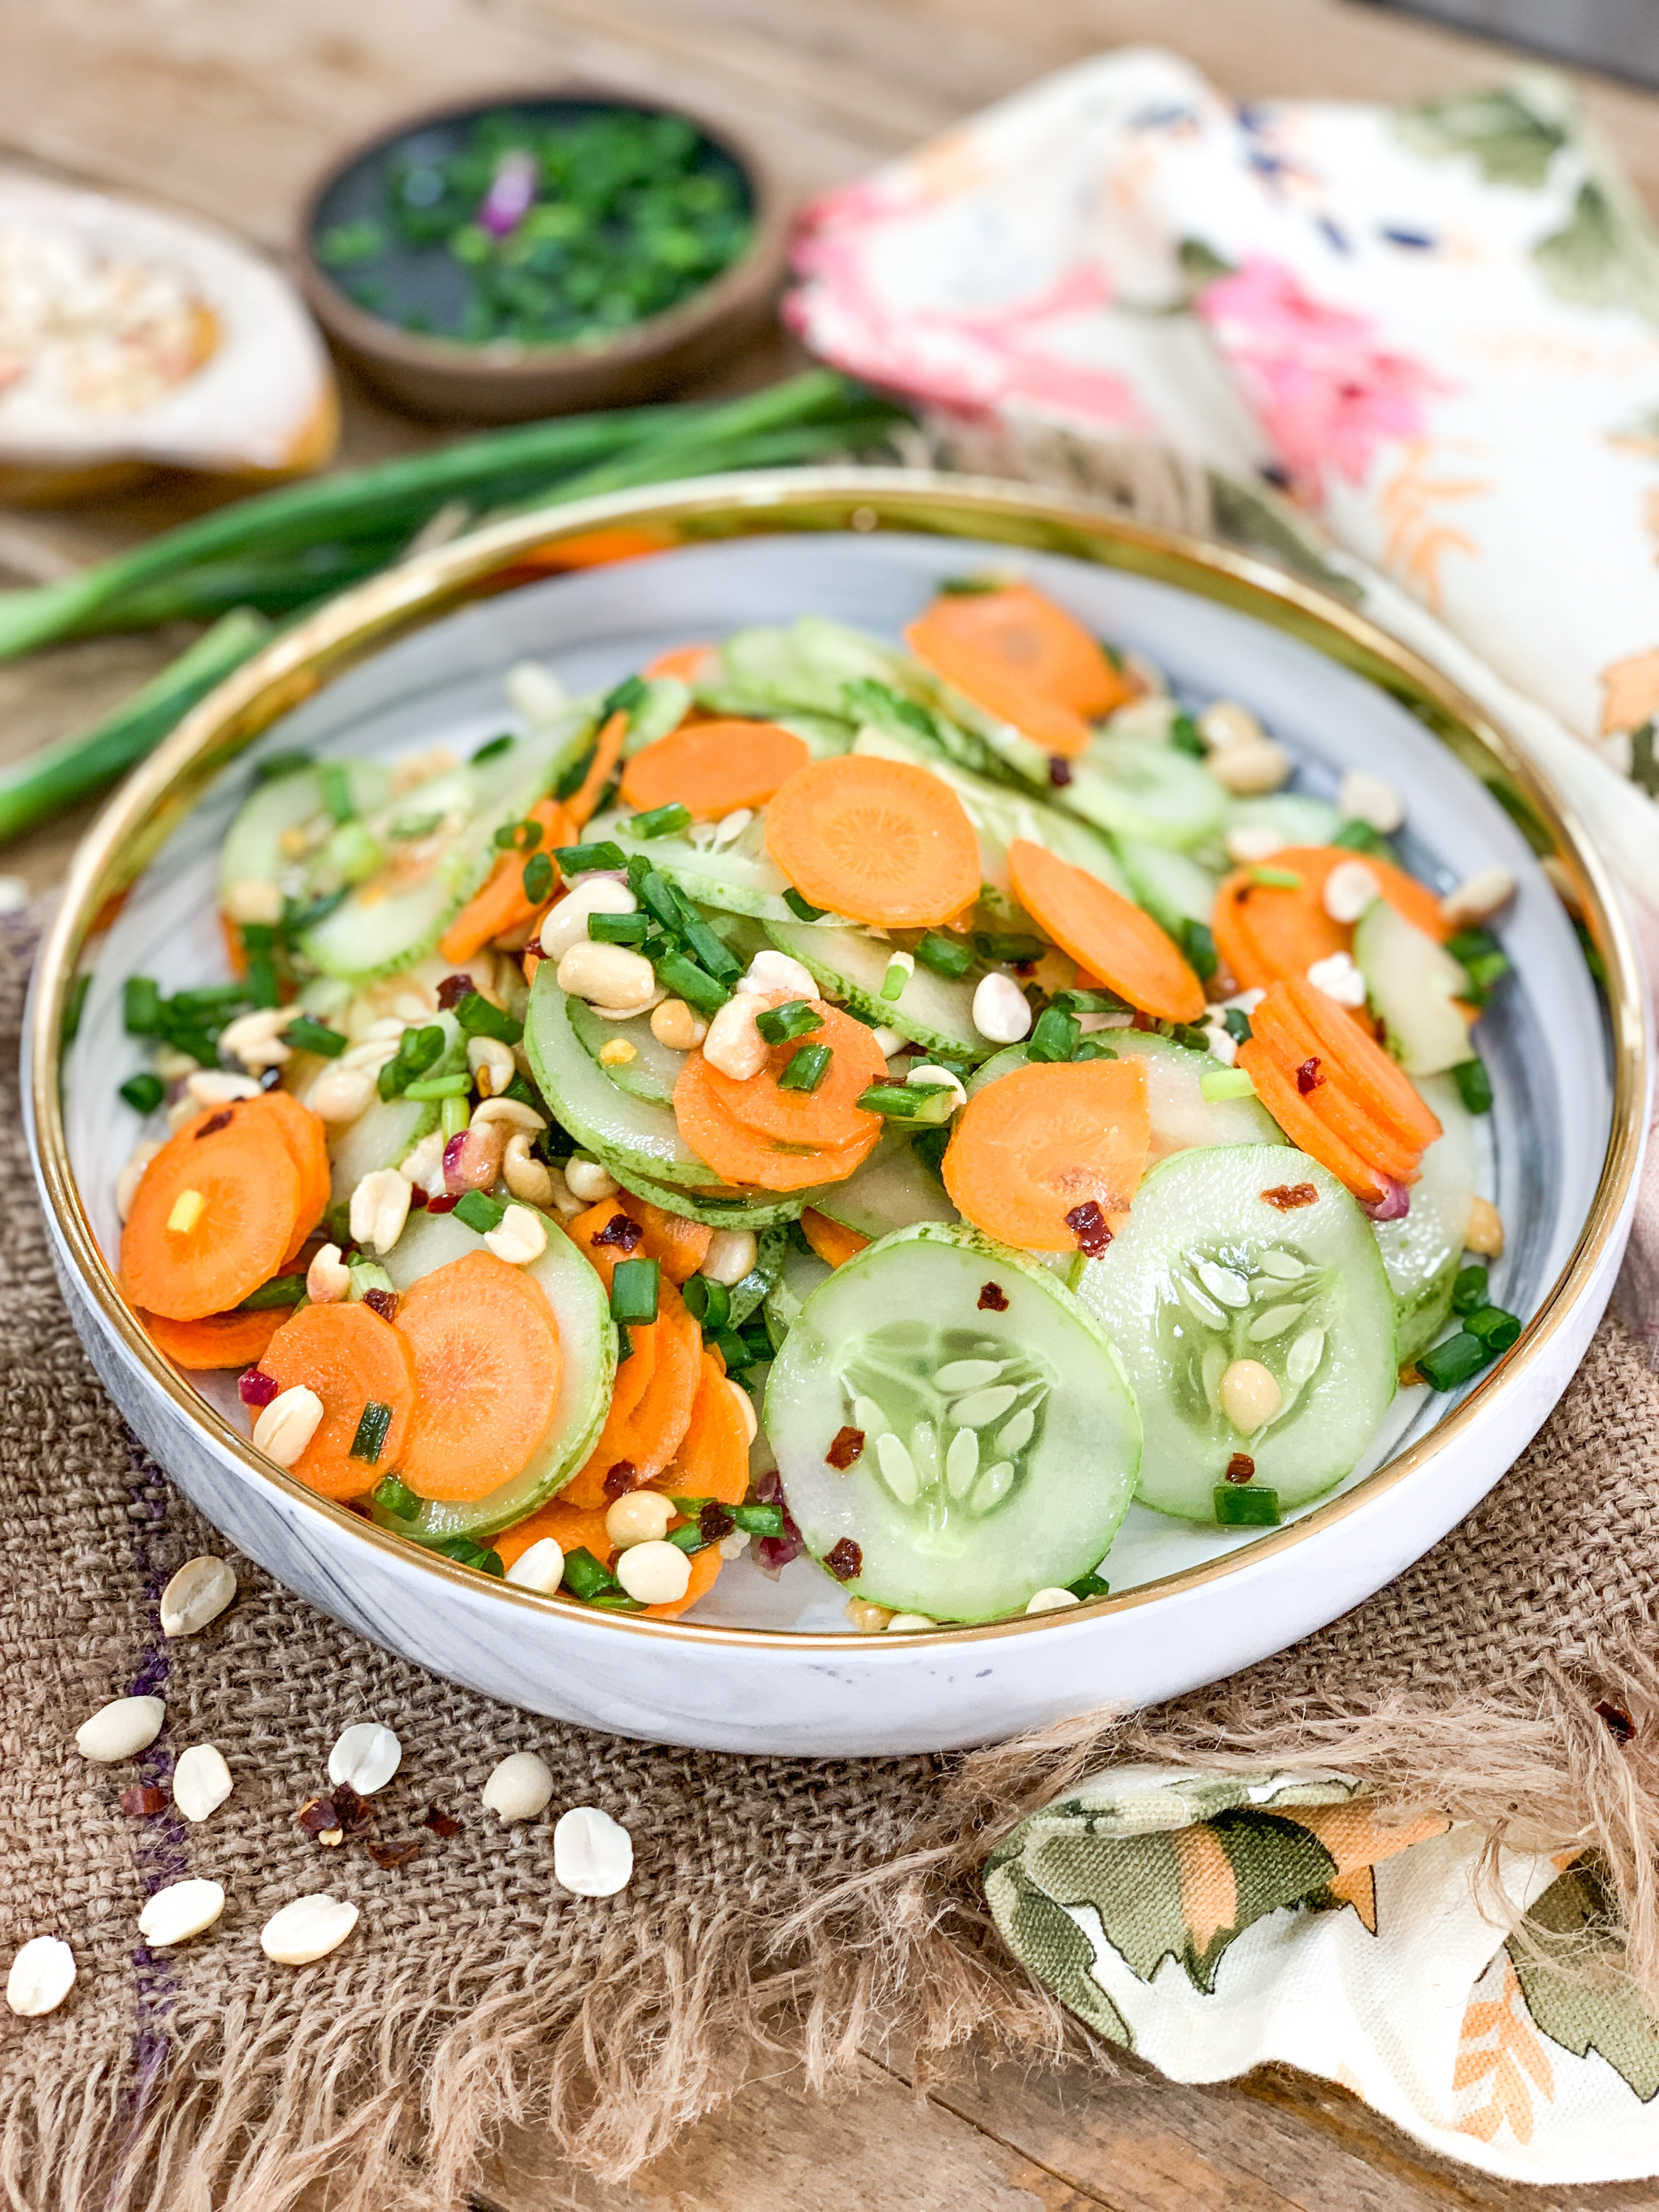 Thai Style Sweet And Sour Cucumber & Carrot Salad Recipe 